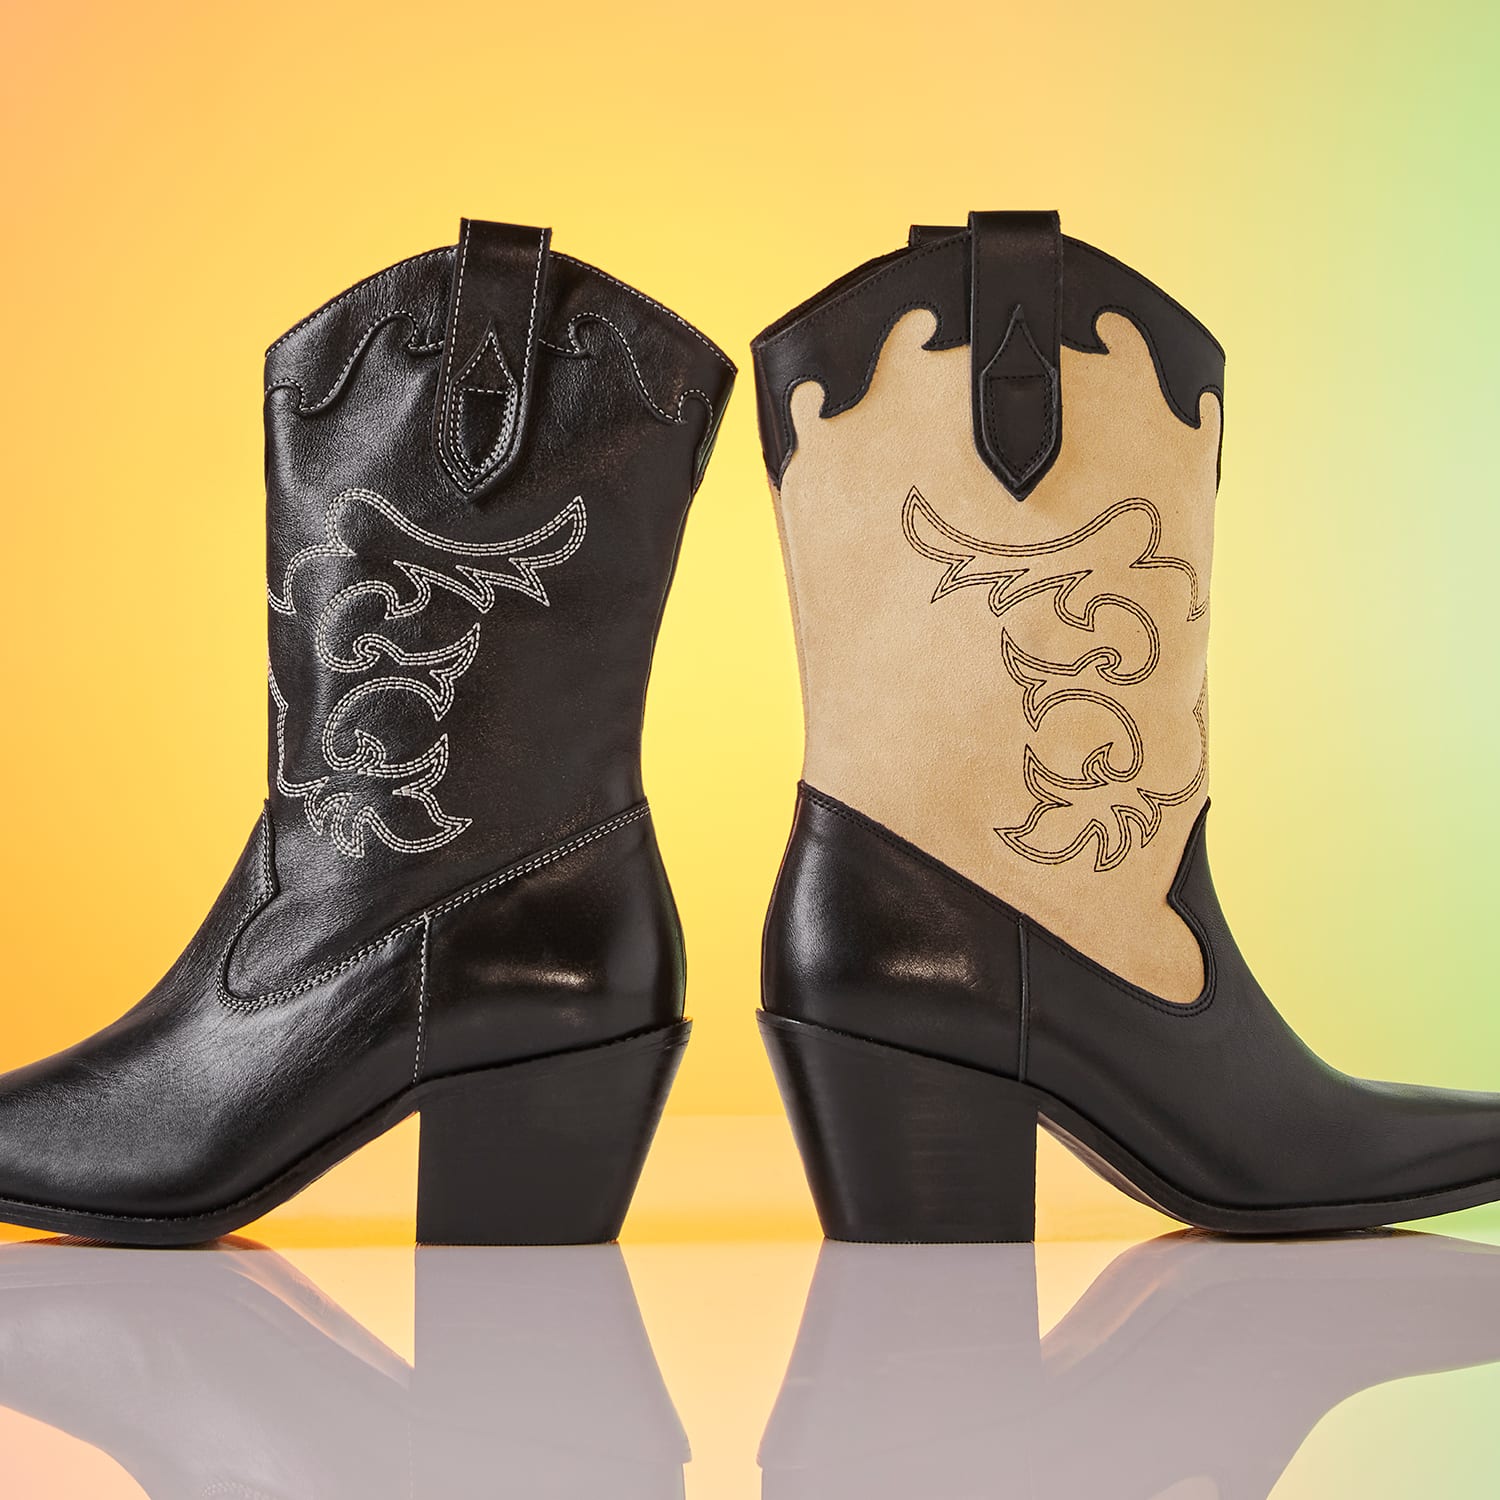 Dune London Prickly mid-height Western boots in black and black and tan